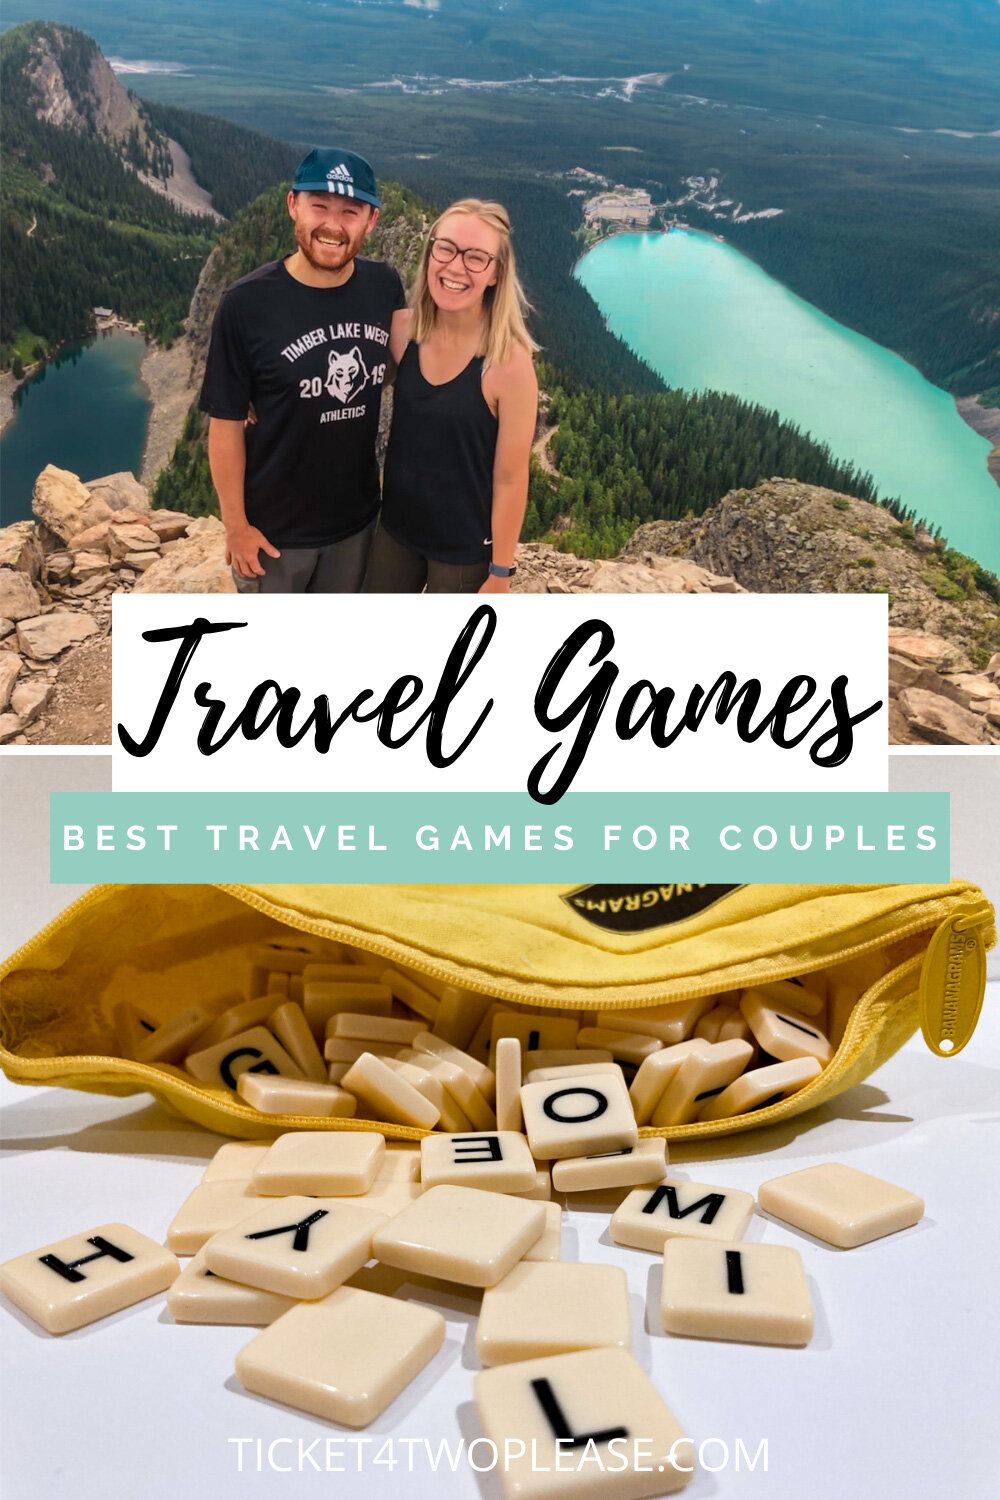 Best Travel Games for Couples